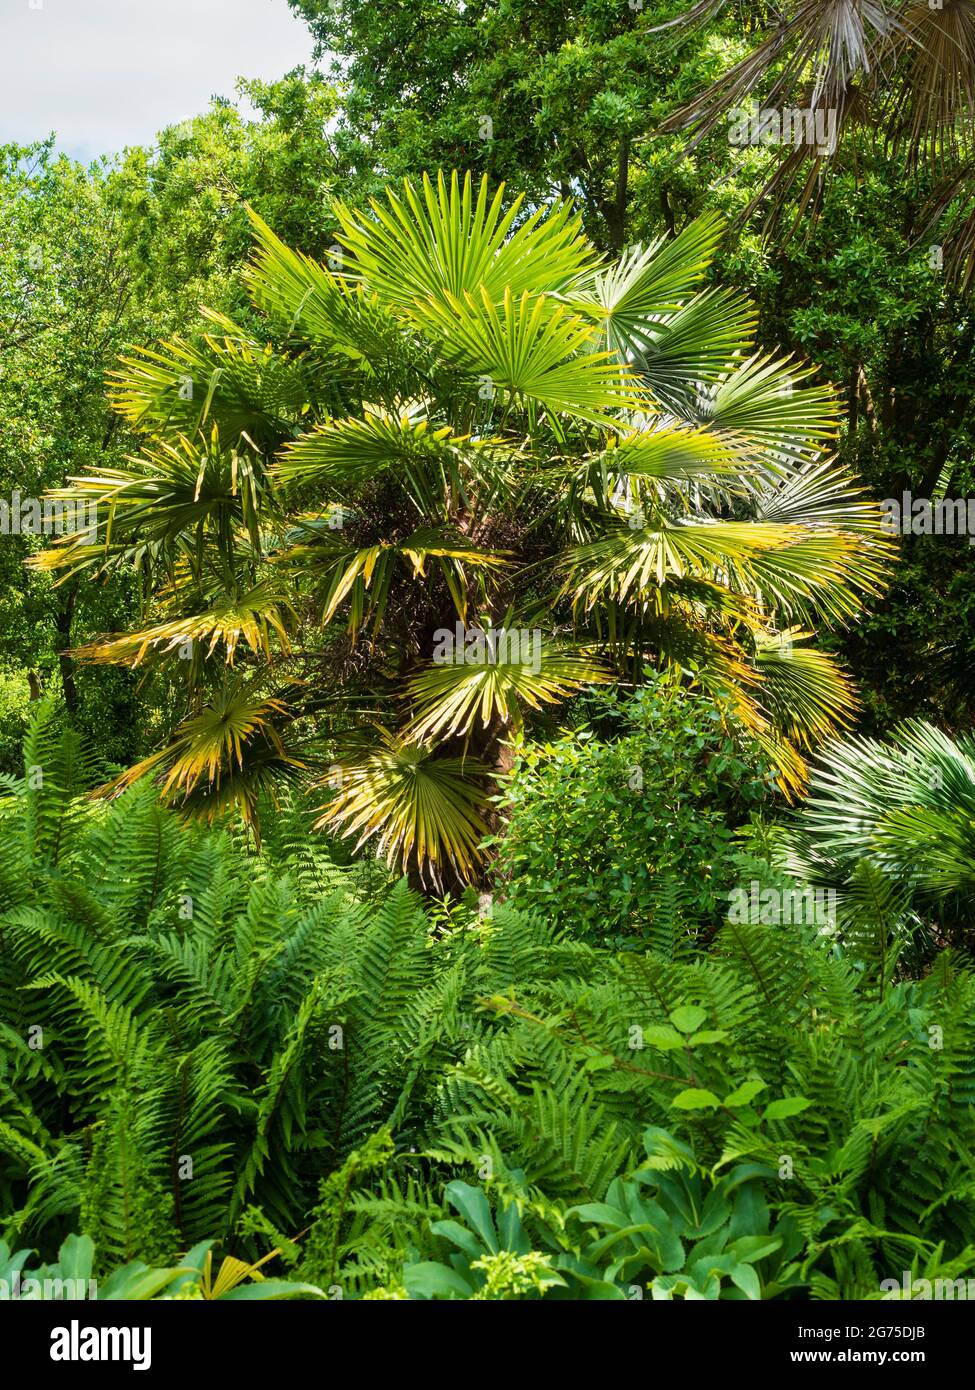 Trachycarpus fortunei, the hardy Chusan fan palm, growing in the dell garden at Mt Edgcumbe country park, Cornwall, UK Stock Photo